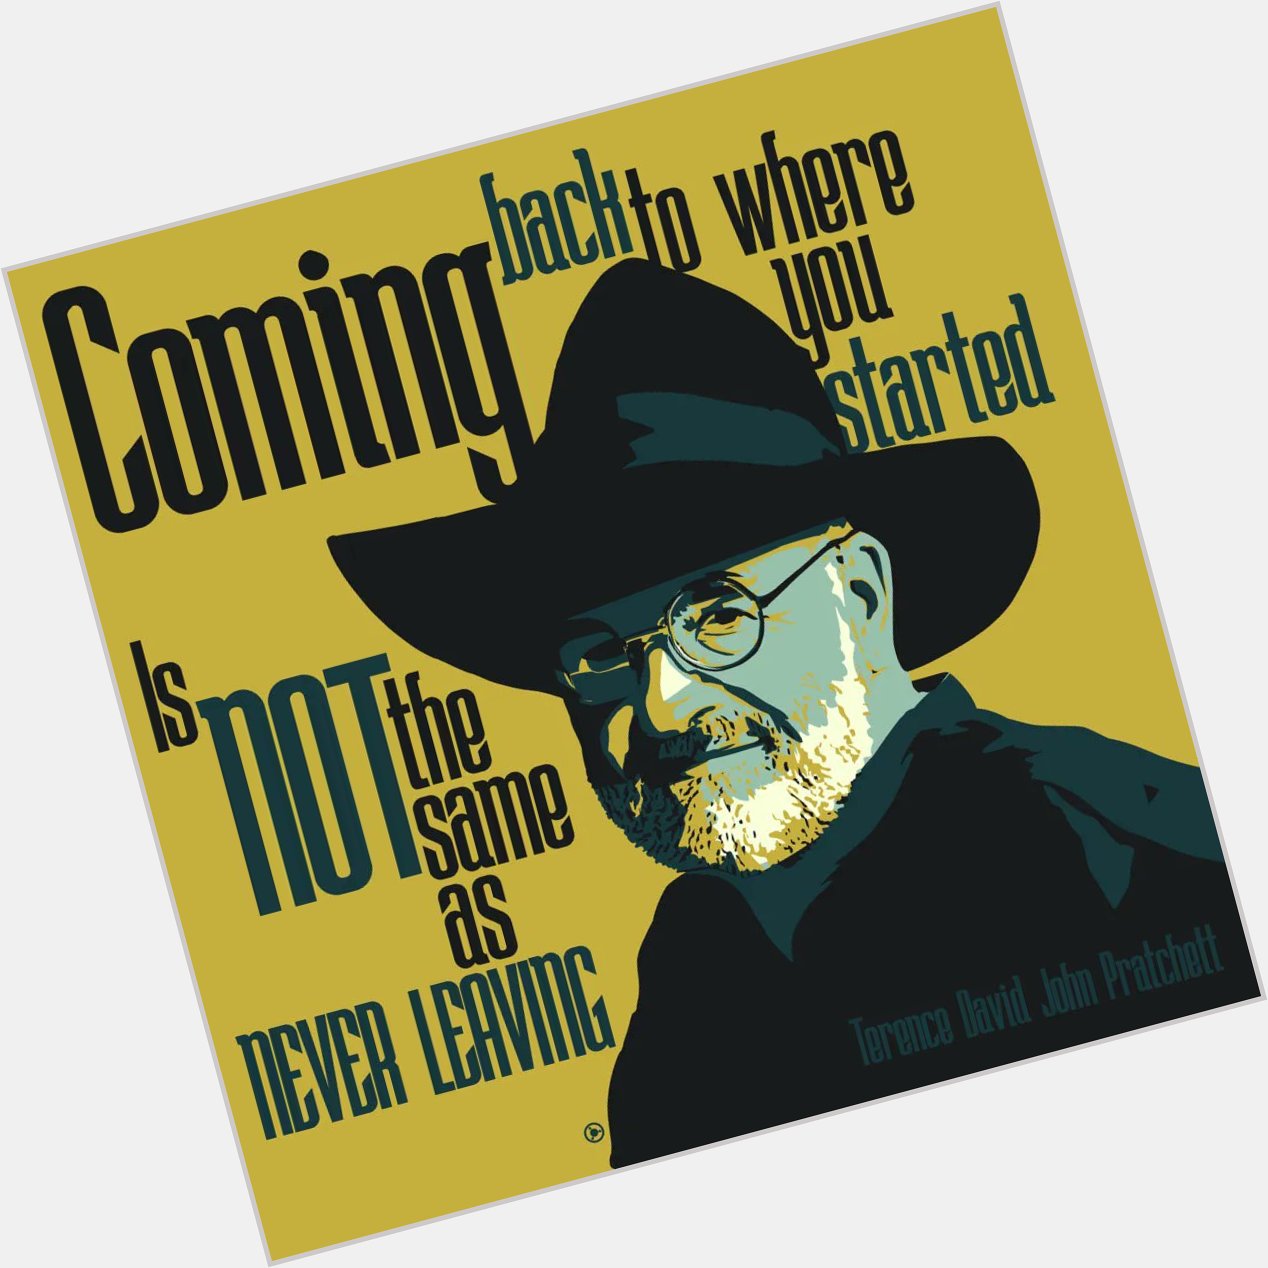  Coming back to where you started is not » - Terry Pratchett (Happy Birthday) [1024x1024] [OC] 